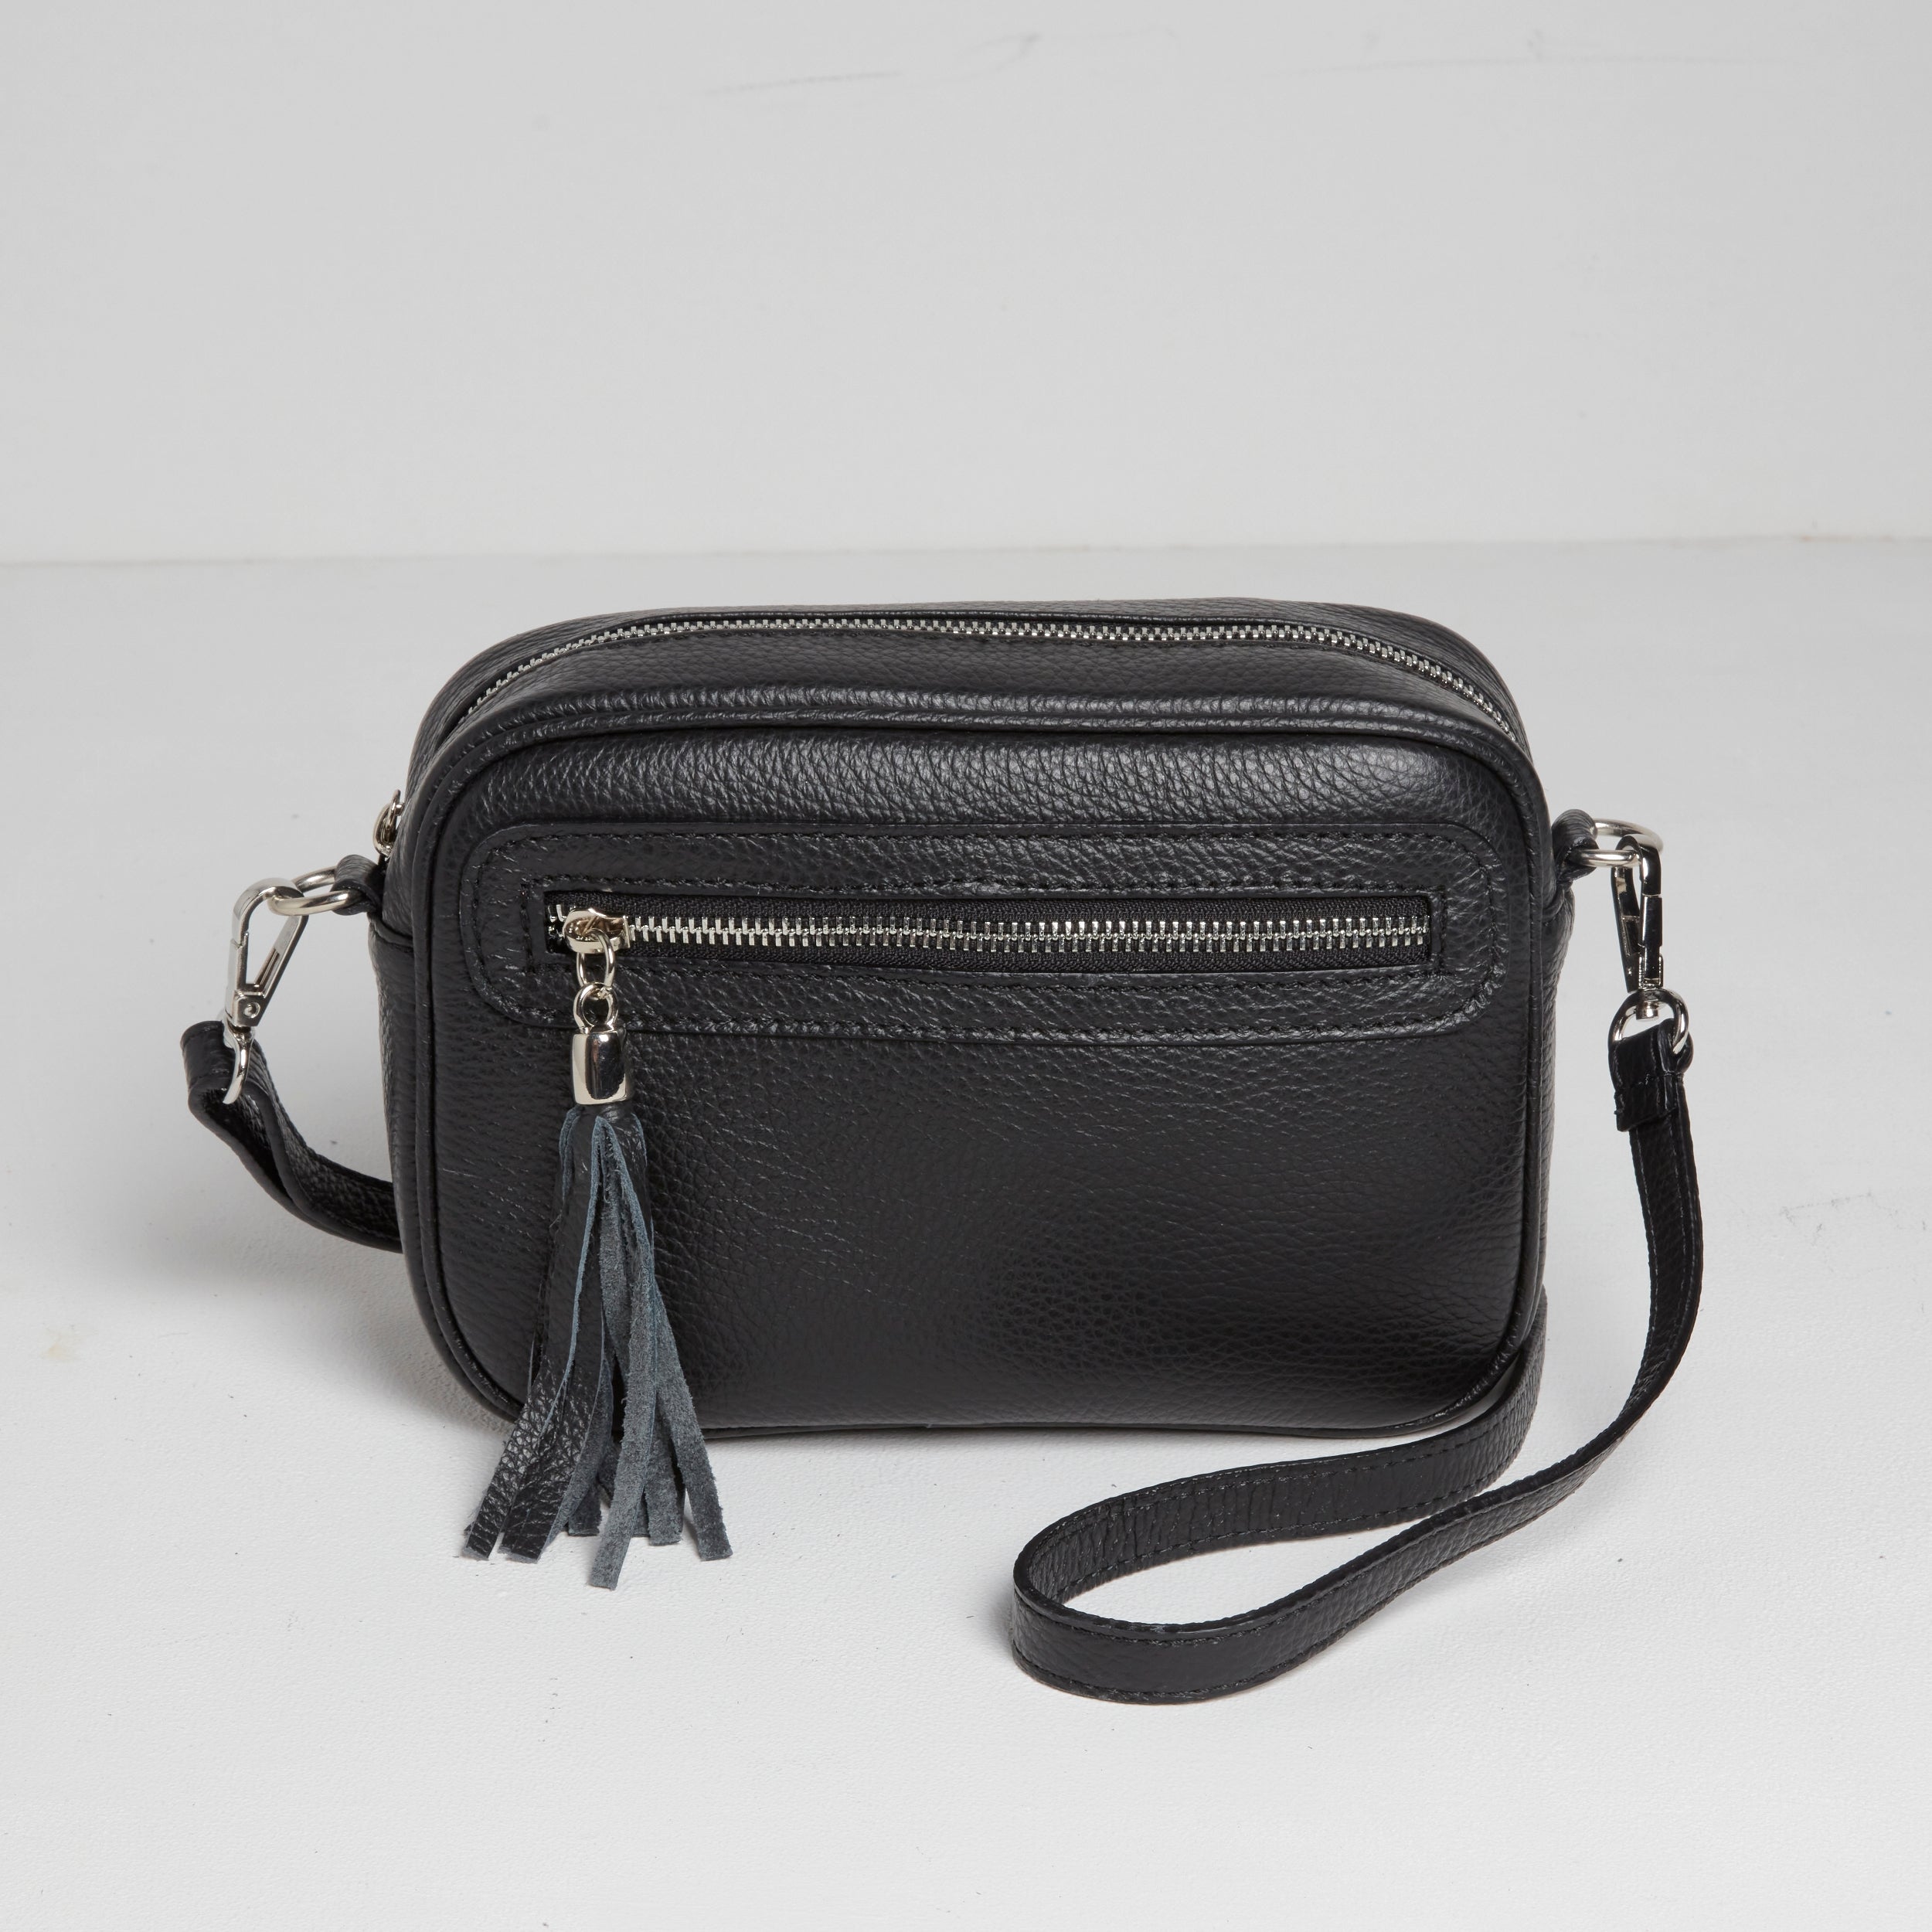 The original leather crossbody bags with interchangeable straps